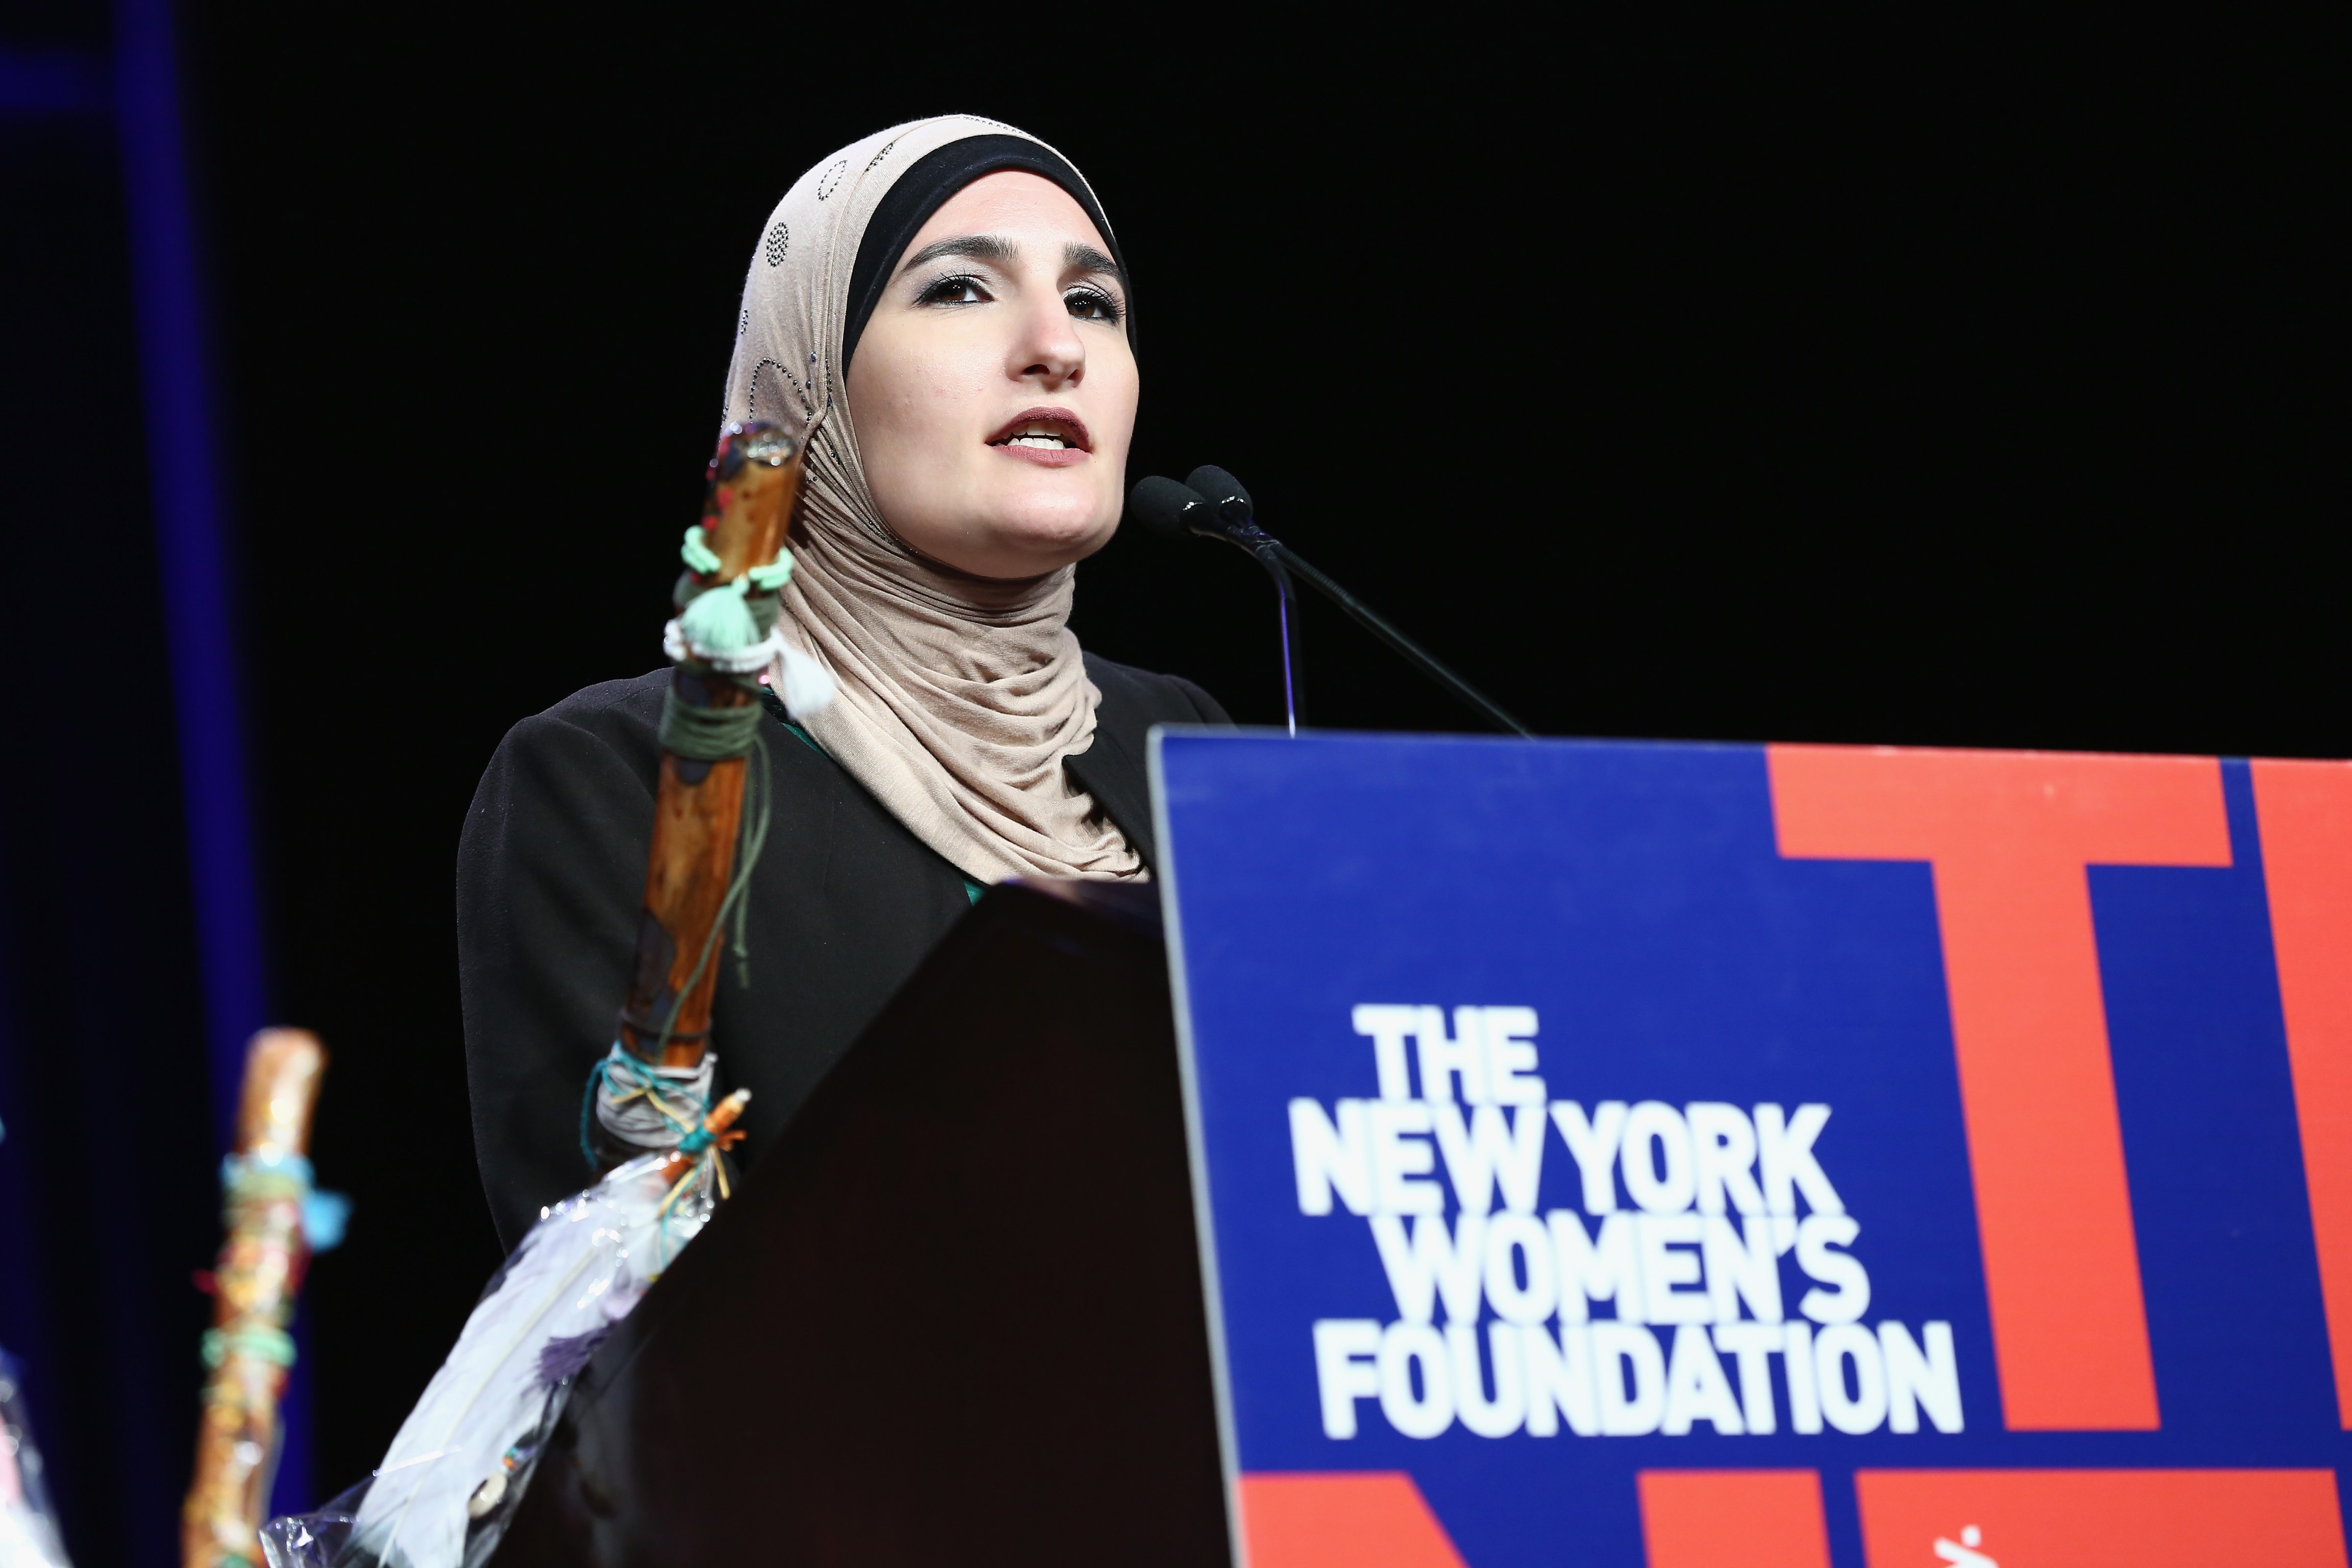 Linda Sarsour speaks onstage during the 30th Anniversary Celebrating Women Breakfast at Marriott Marquis Hotel on May 11, 2017 in New York City. (Monica Schipper—The New York Women's Foundation/Getty Images)